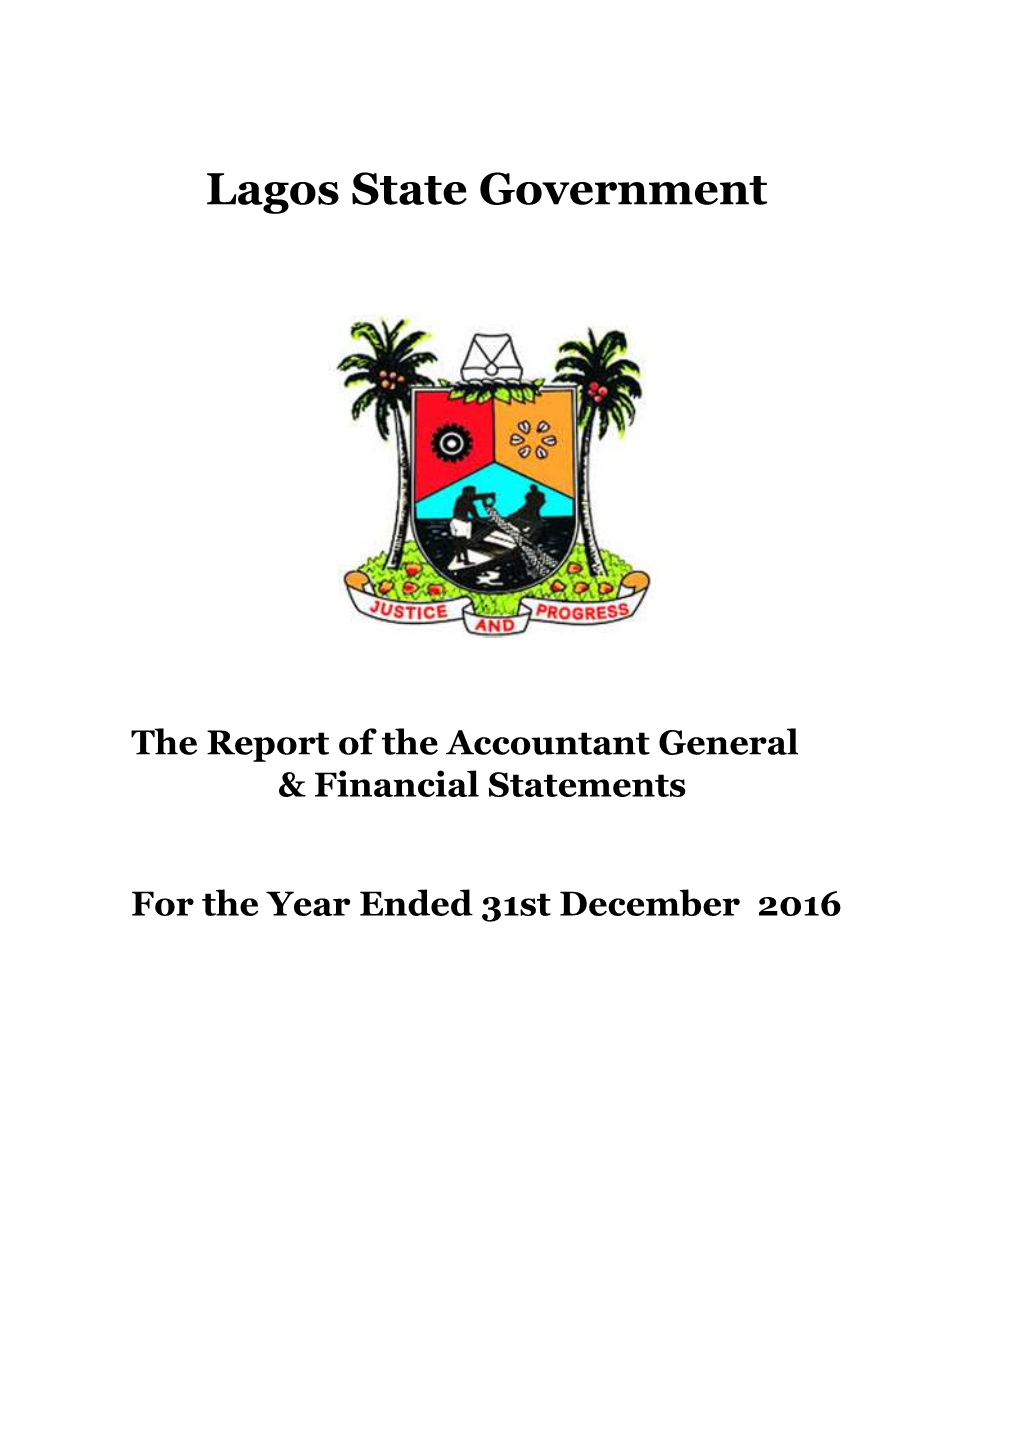 The Report of the Accountant General & Financial Statements for the Year Ended 31St December 2016